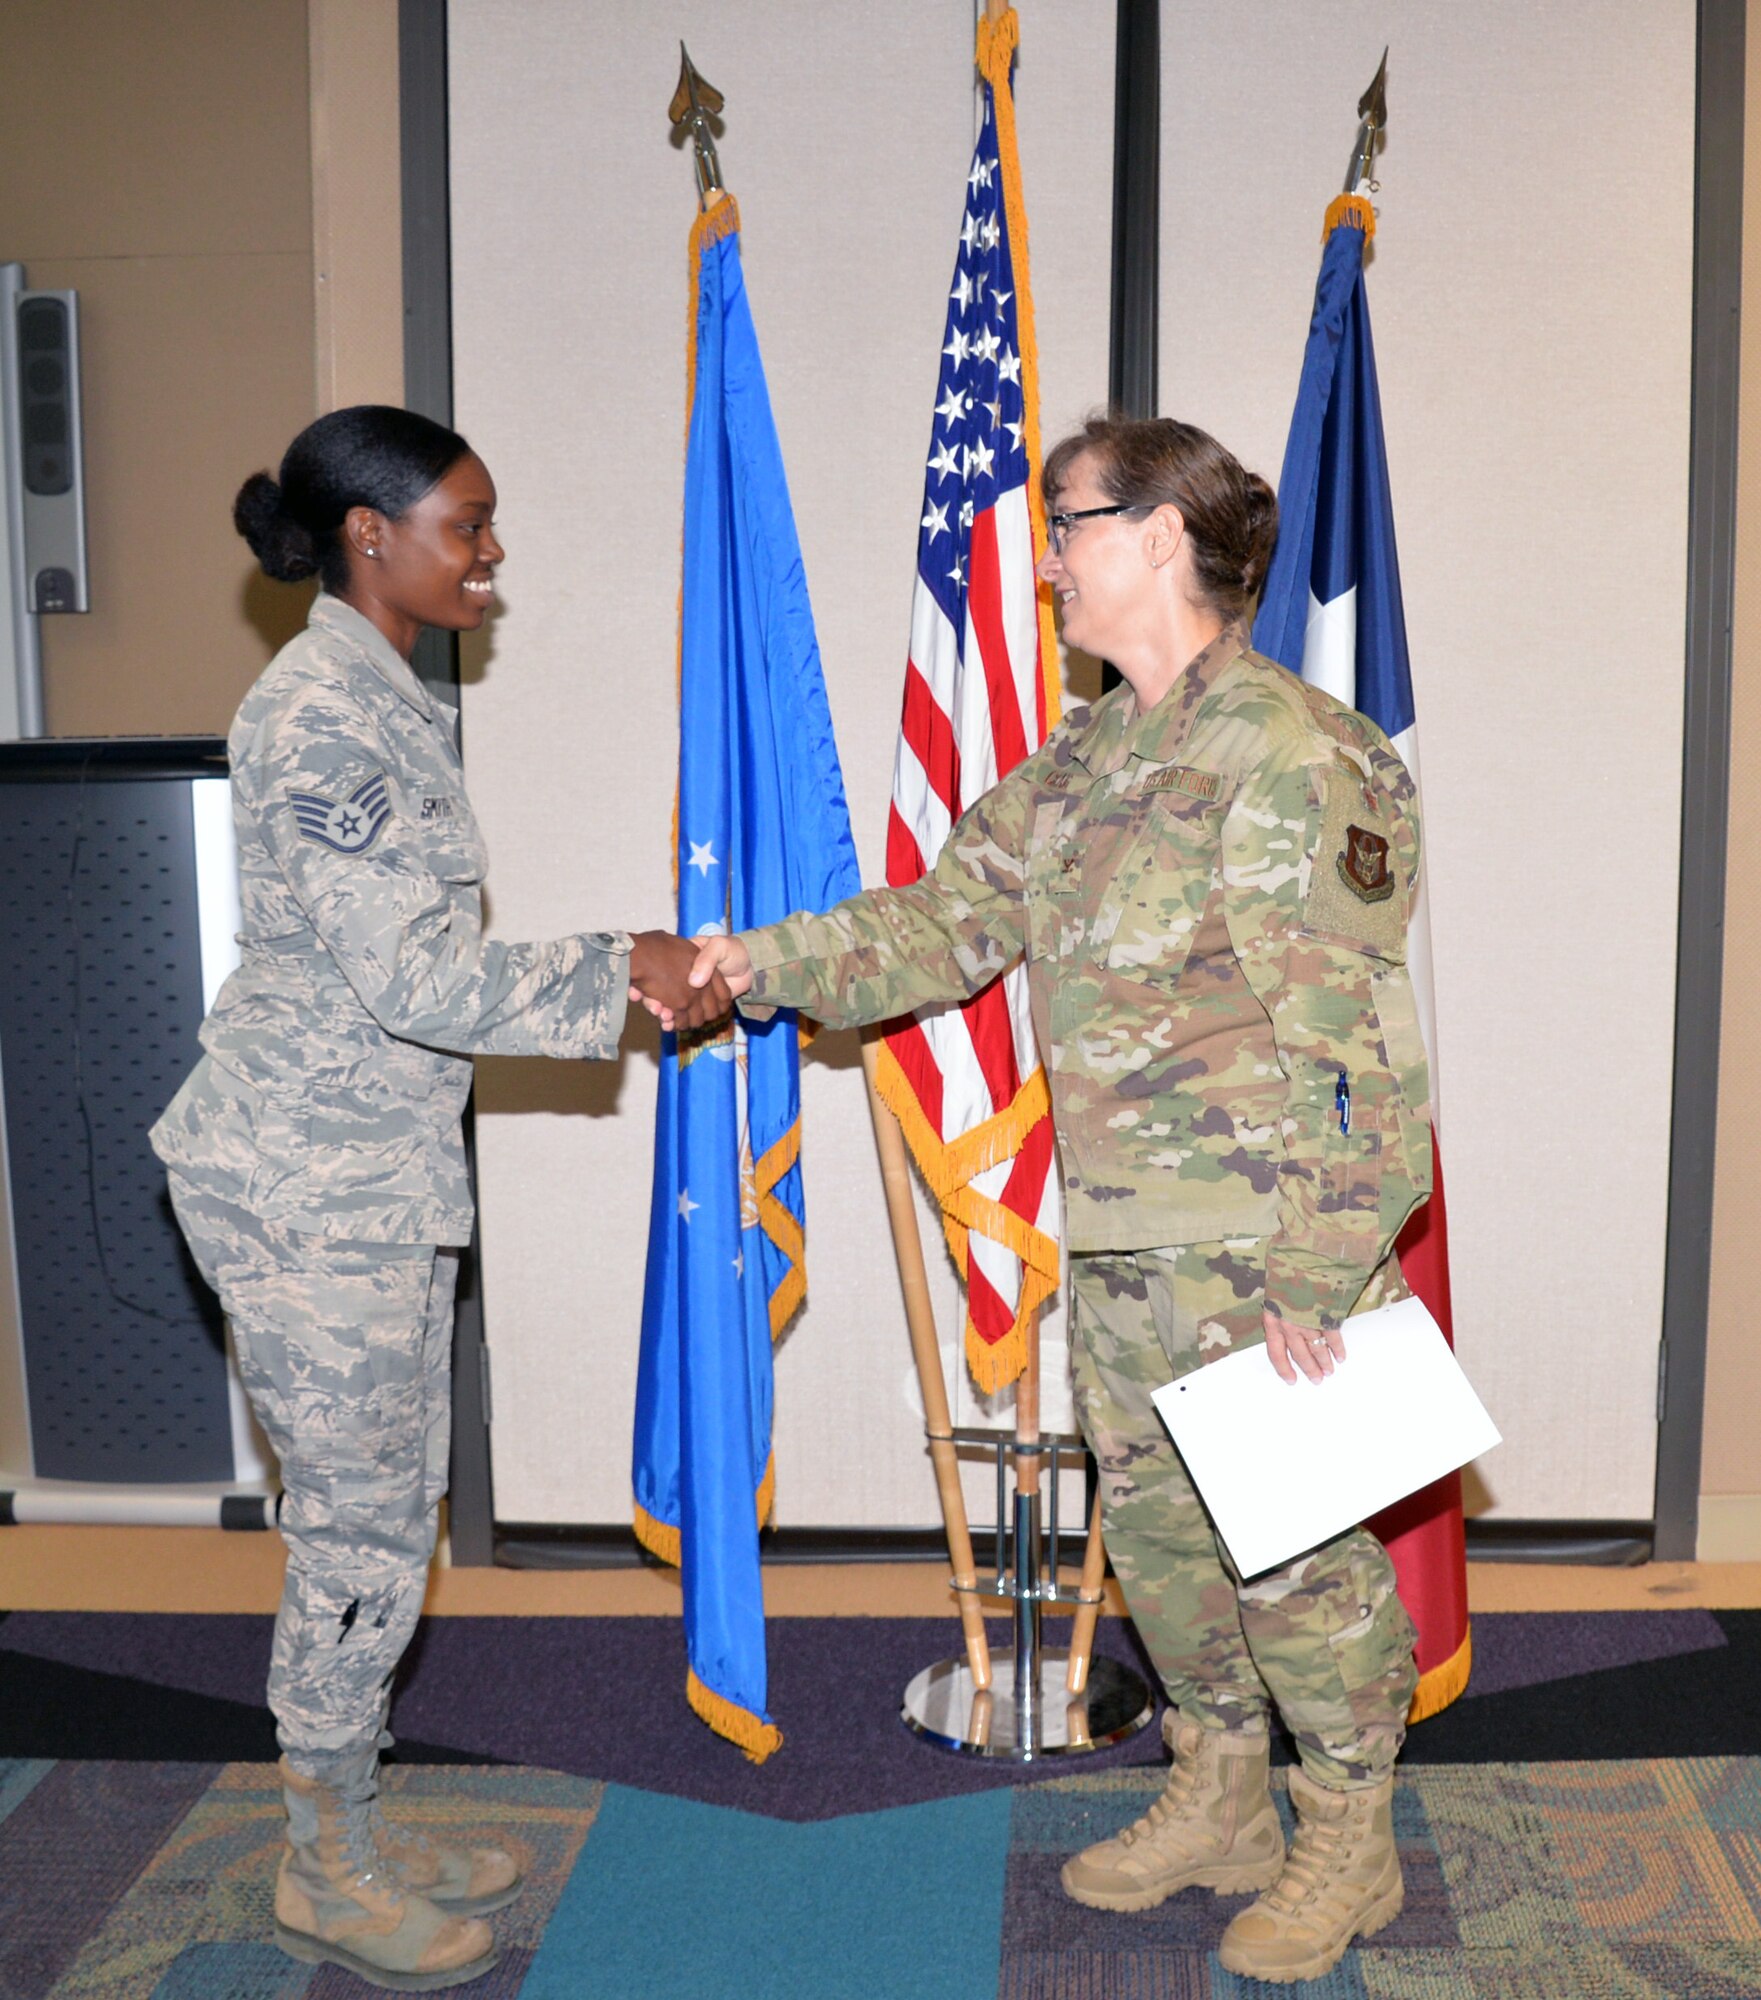 Col. Lisa M. Craig, Air Force Reserve Command director of manpower, personnel, and services, presents a coin to Staff Sgt. Chelsea Smith, 433rd Force Support Squadron sustainment specialst, Aug 3, 2019 at Joint Base San Antonio-Lackland, Texas.